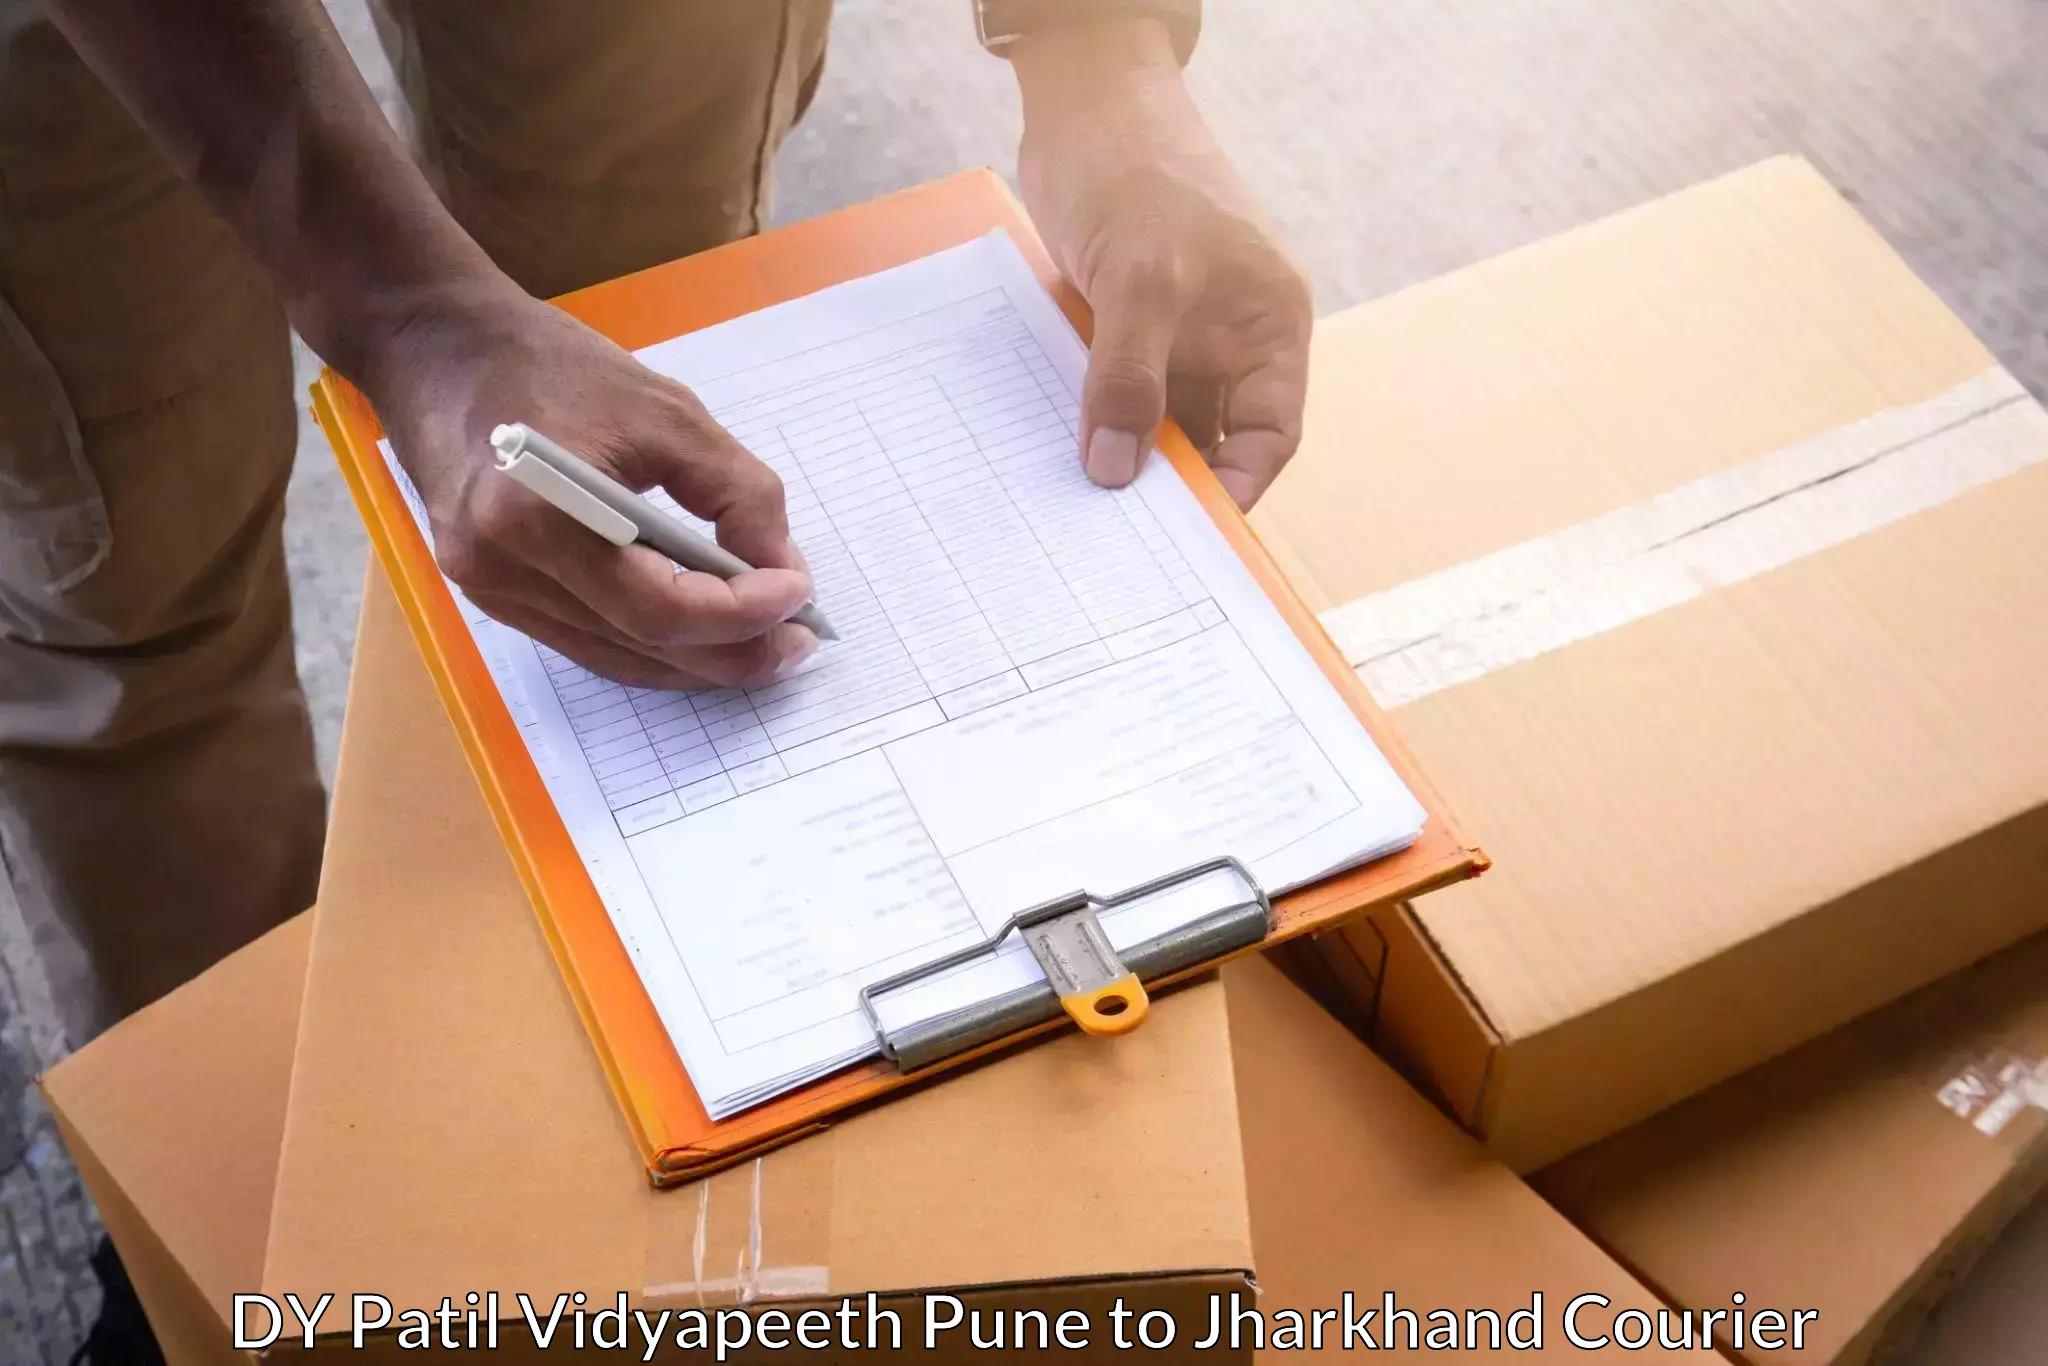 Express mail service in DY Patil Vidyapeeth Pune to Musabani